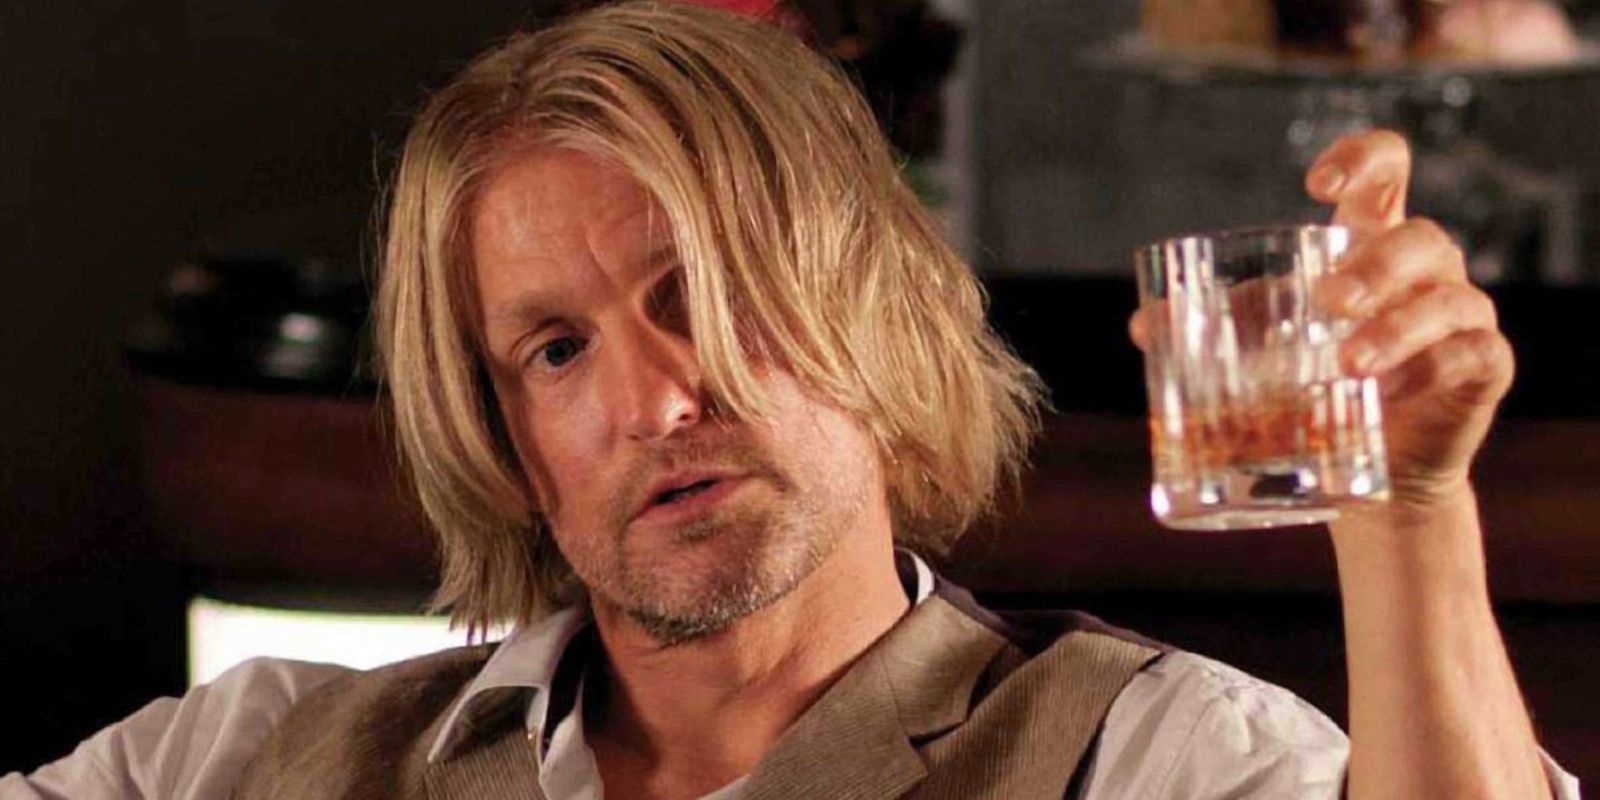 Haymitch holding up a drink from The Hunger Games